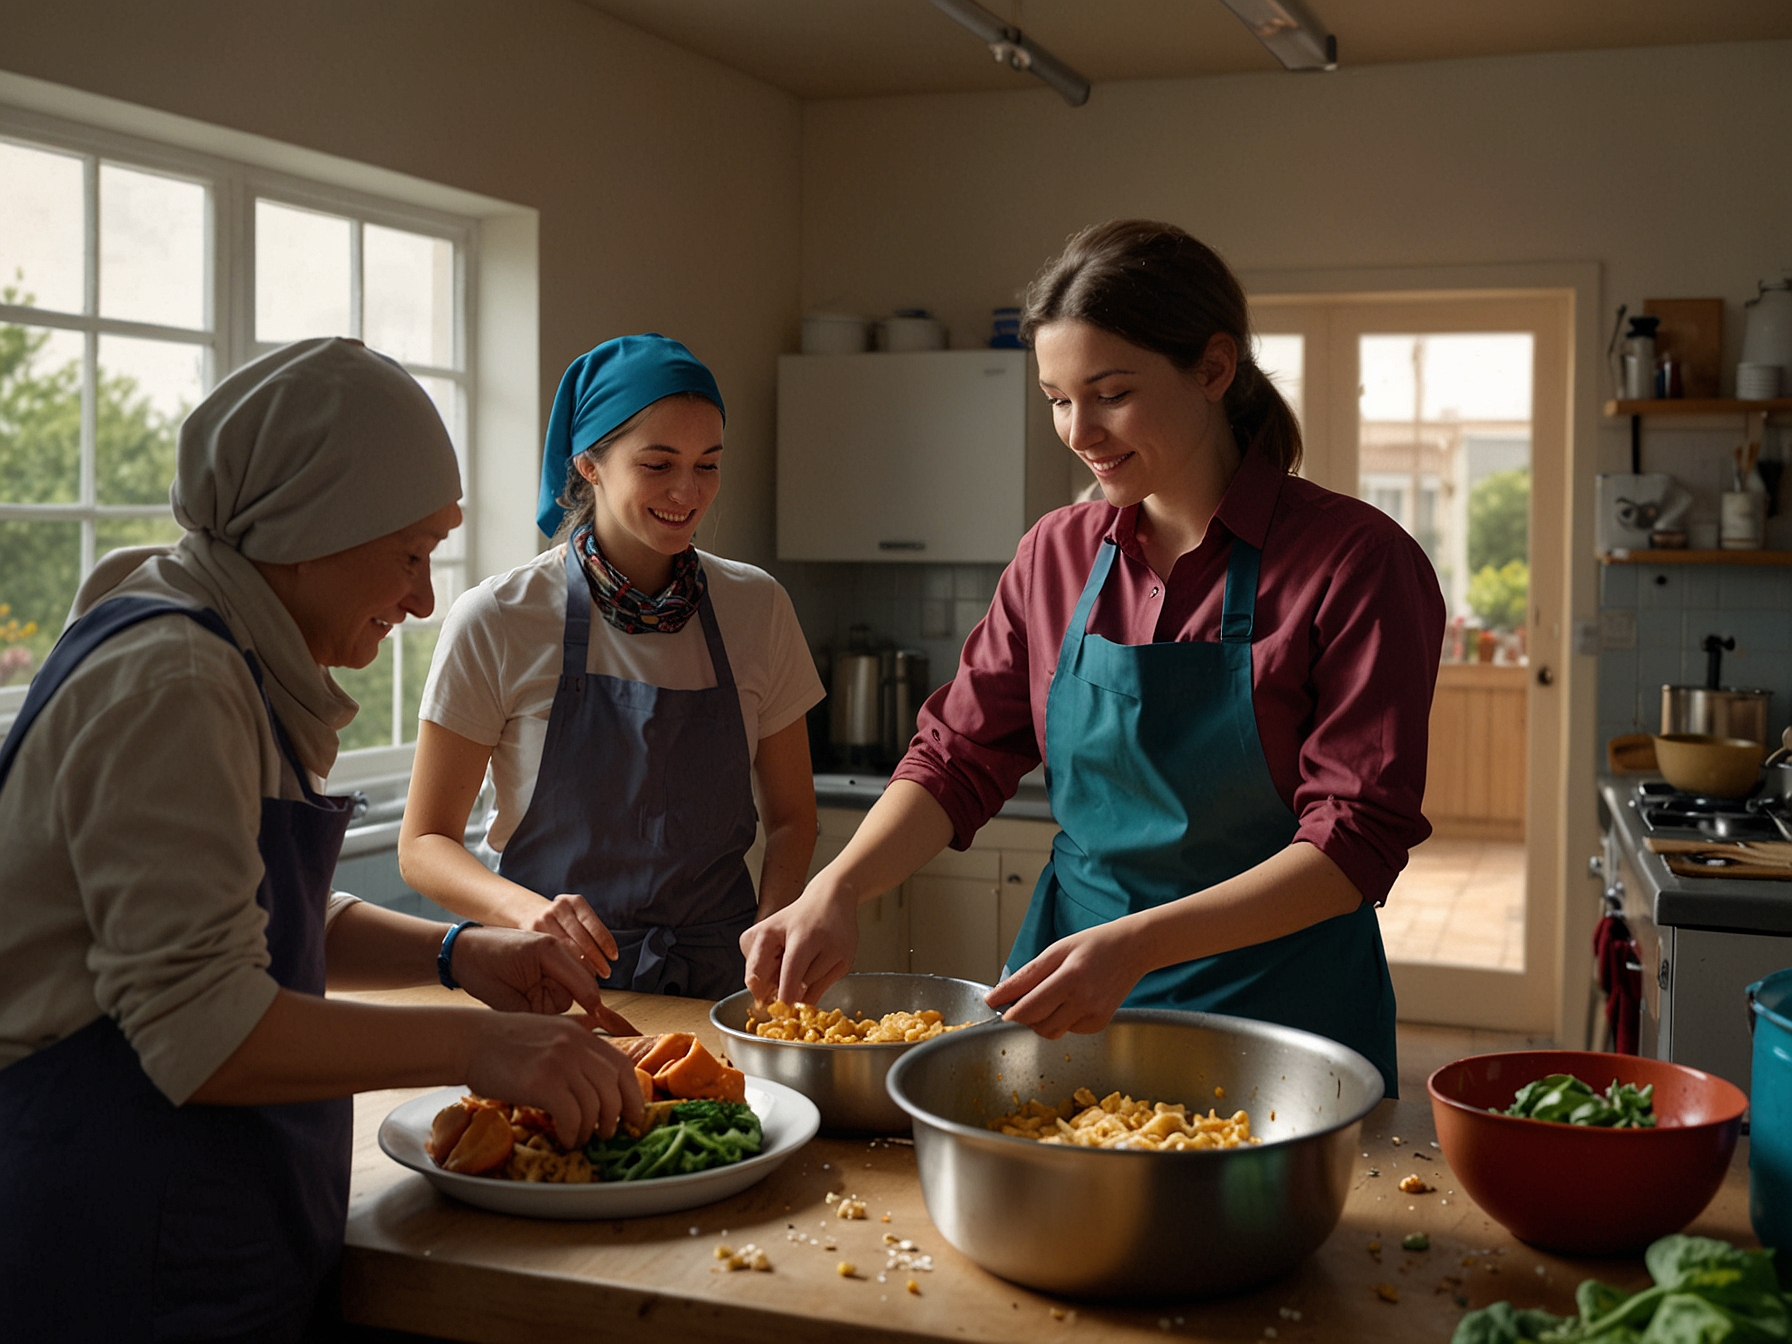 Image of Sophie Bell guiding homeless participants in a vibrant kitchen, where they are actively engaged in learning to prepare and cook meals.